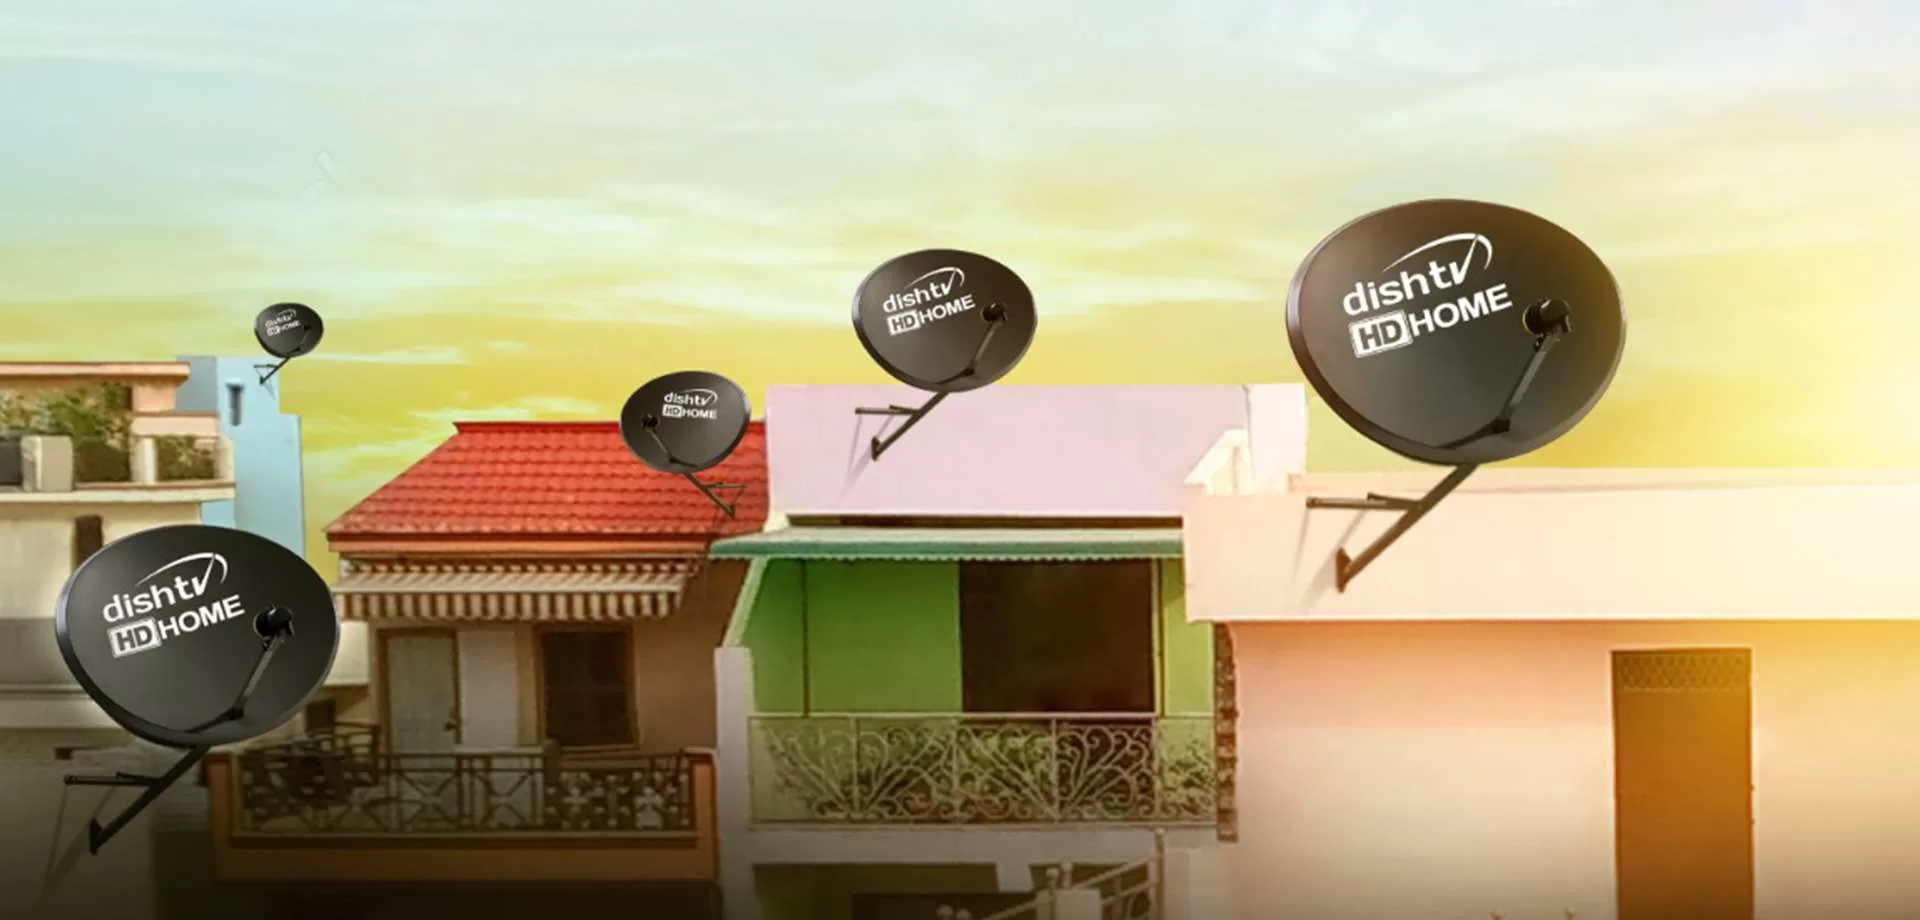 Dish TV boosts platform performance by 2x with Microsoft technology and unified support